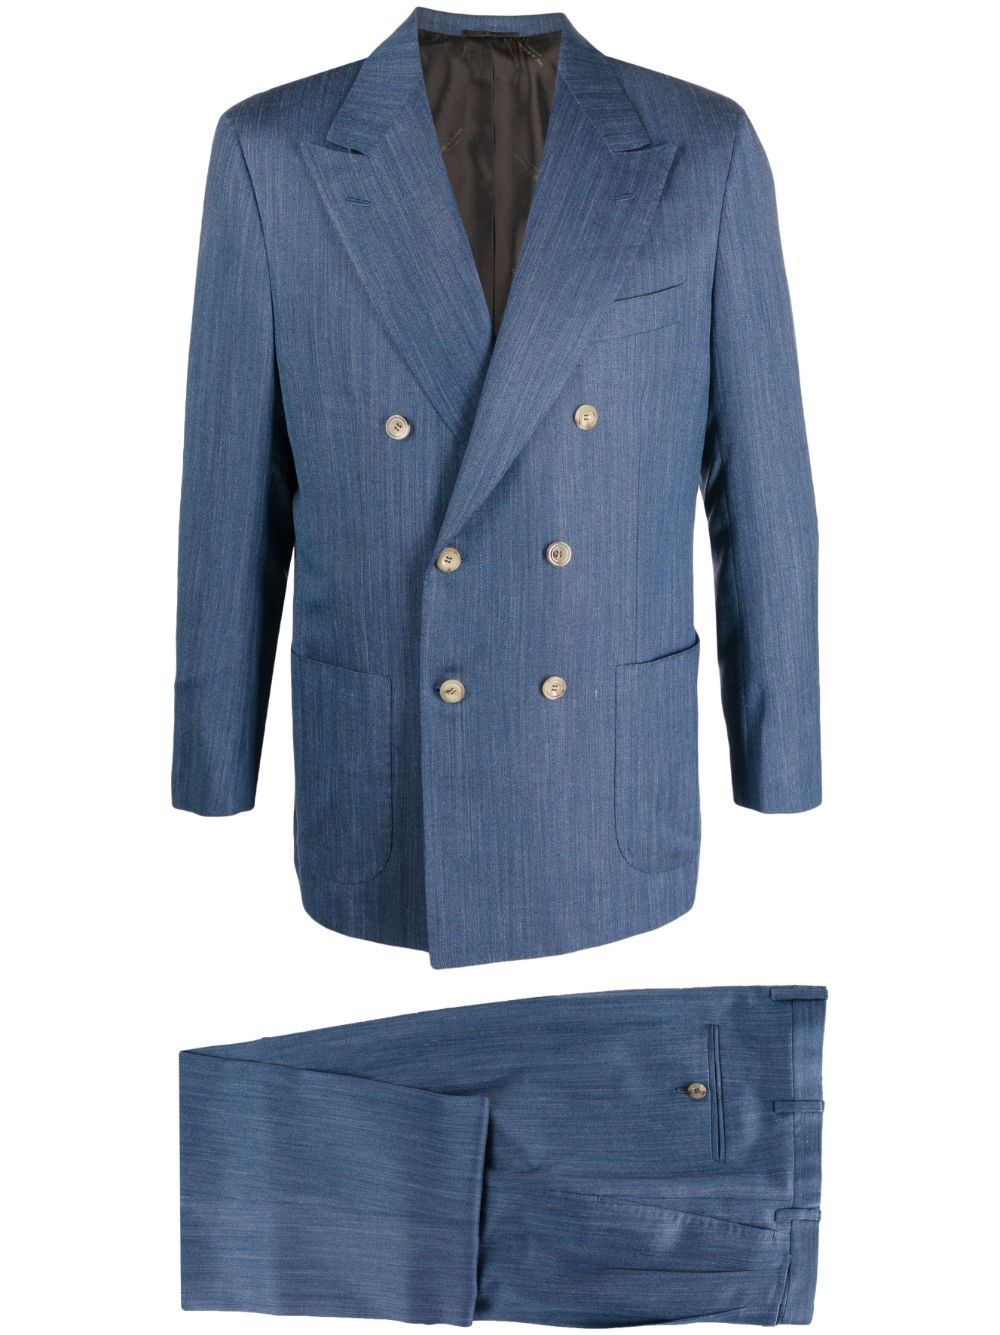 Kiton double-breasted Suit - Farfetch